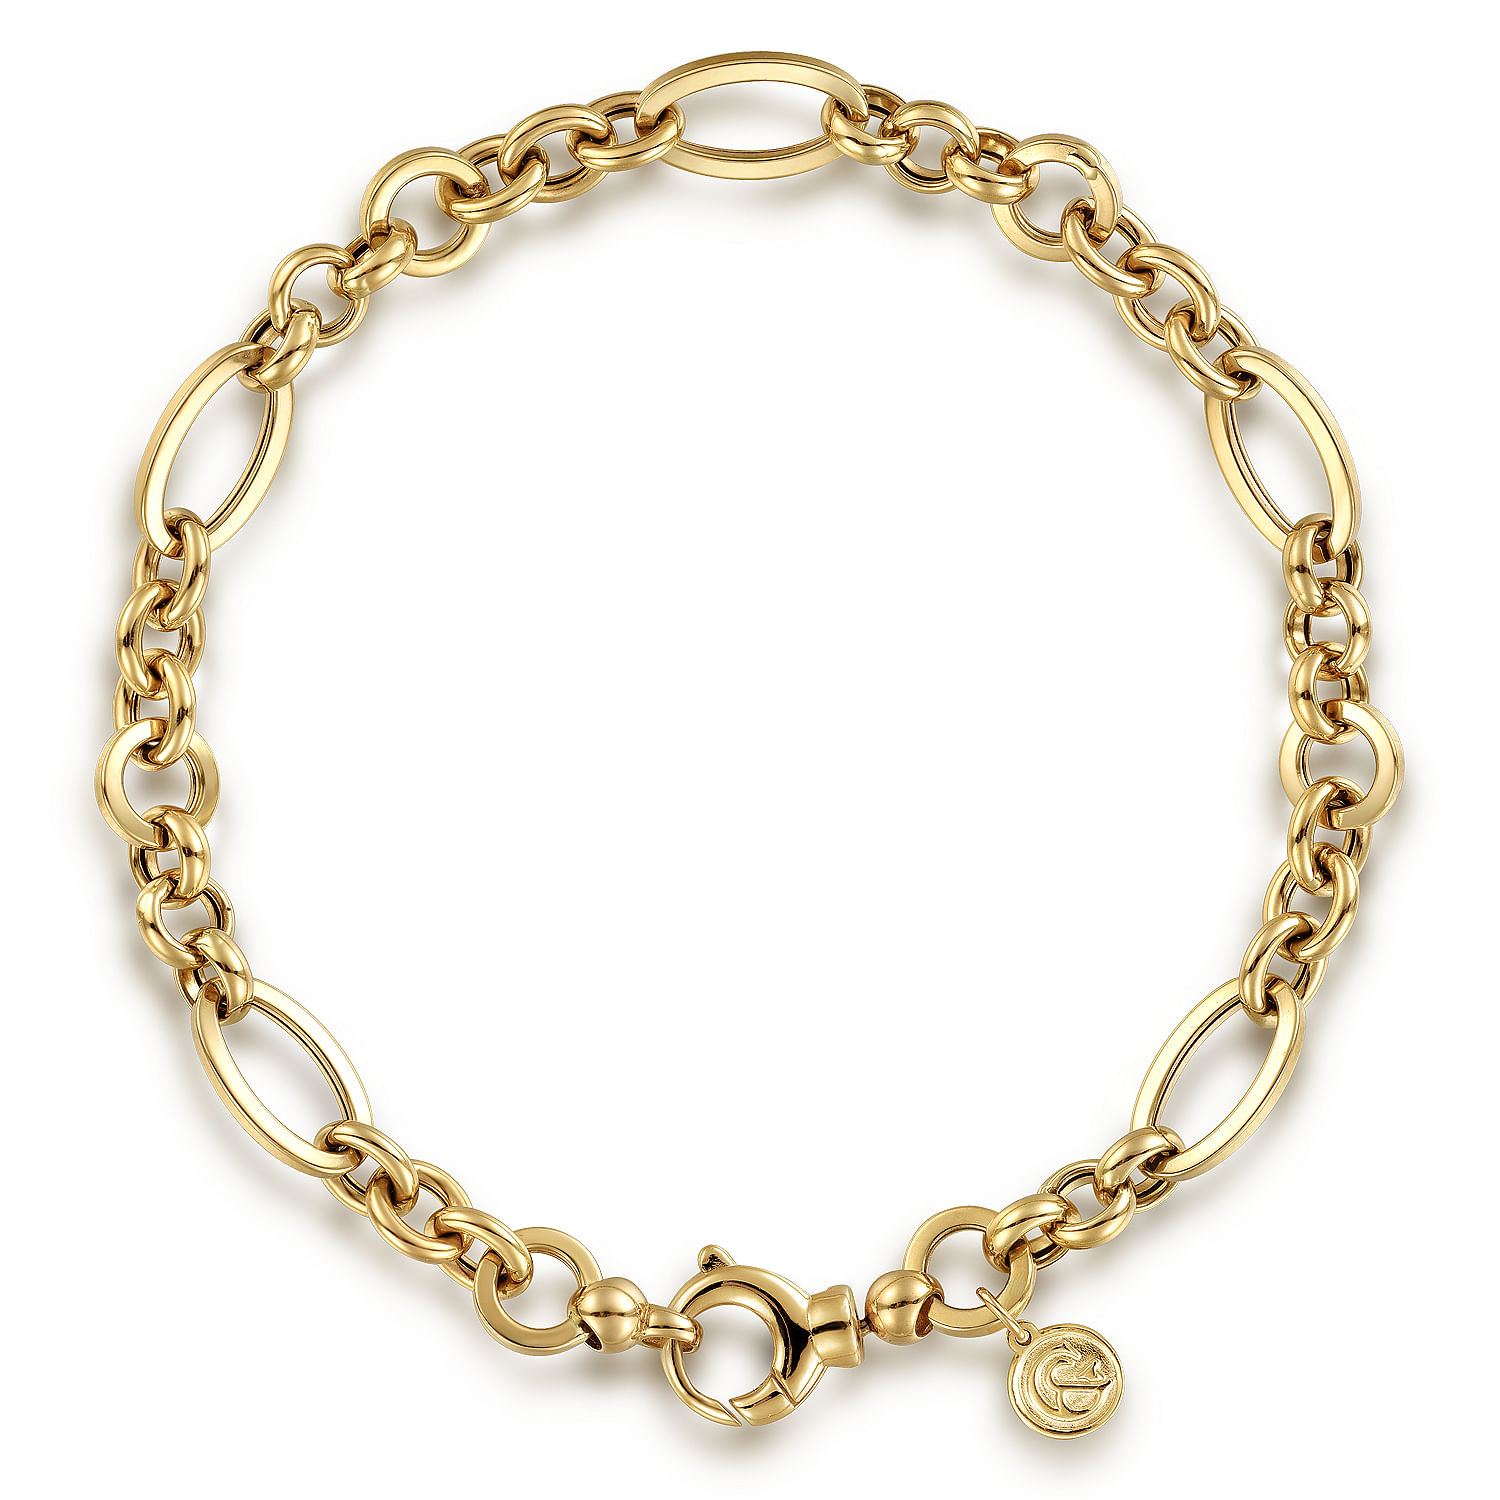 8 inch 14K Yellow Gold Hollow Figaro Link Chain Bracelet